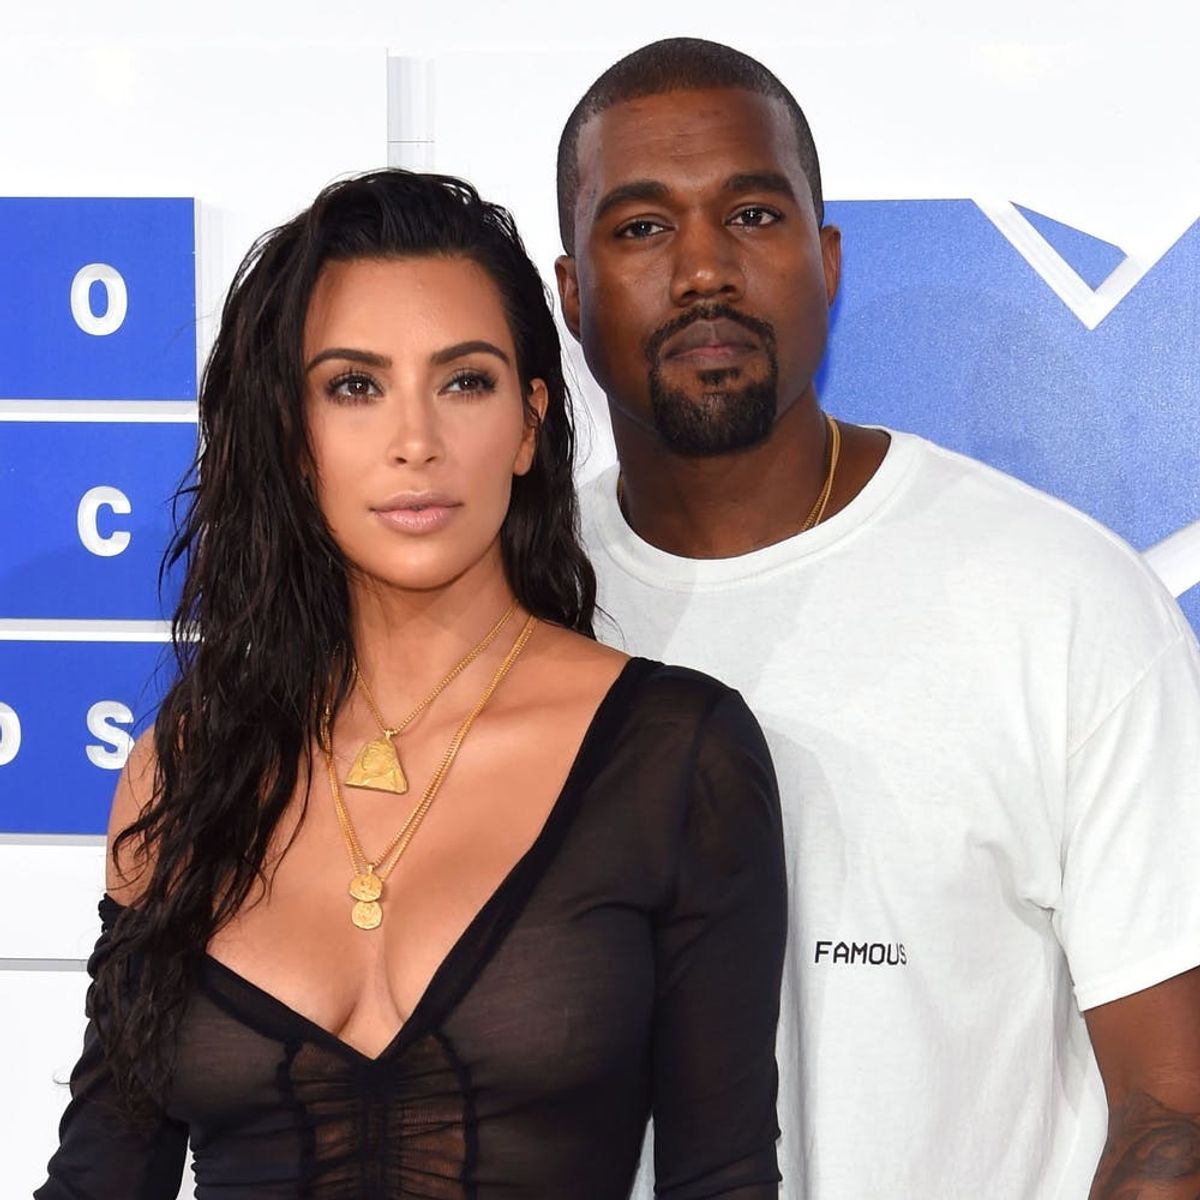 Here’s How the Kardashians Are Celebrating the Arrival of New Baby Kimye